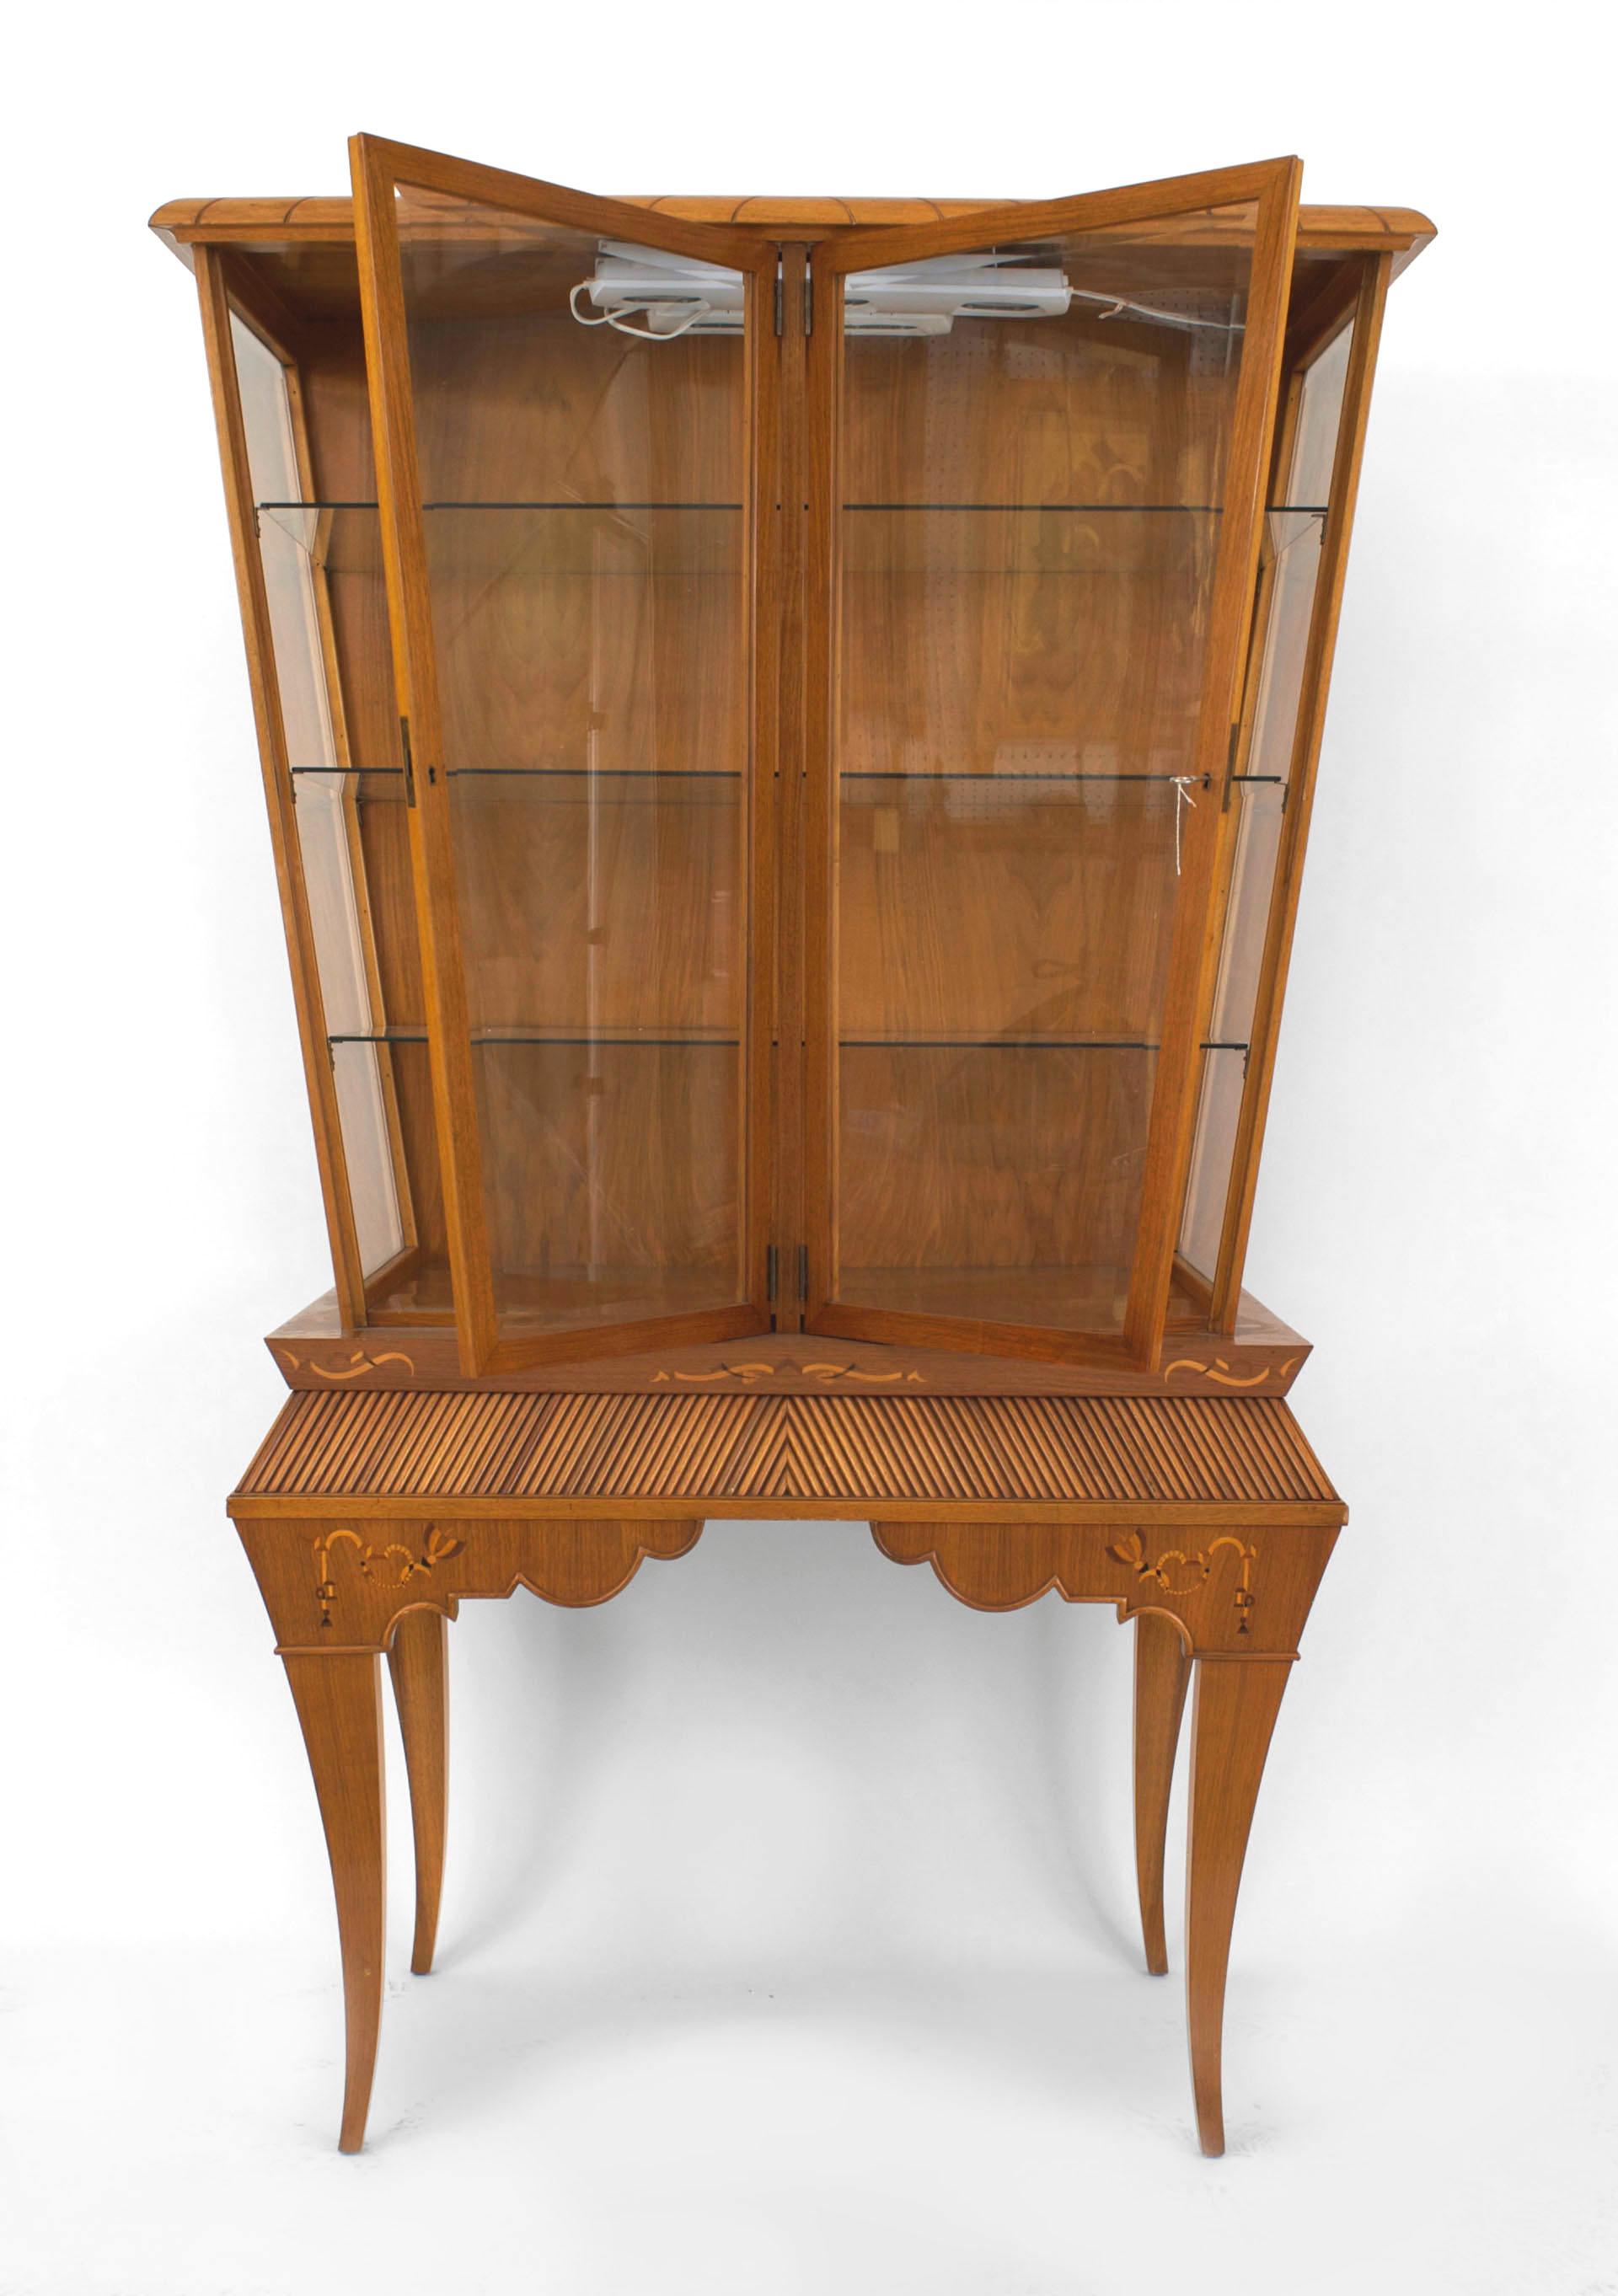 Scandinavian Mid-Century light mahogany display/vitrine cabinet with a keystone shaped top sections supported on a base with a fluted apron and inlaid floral design trim.
